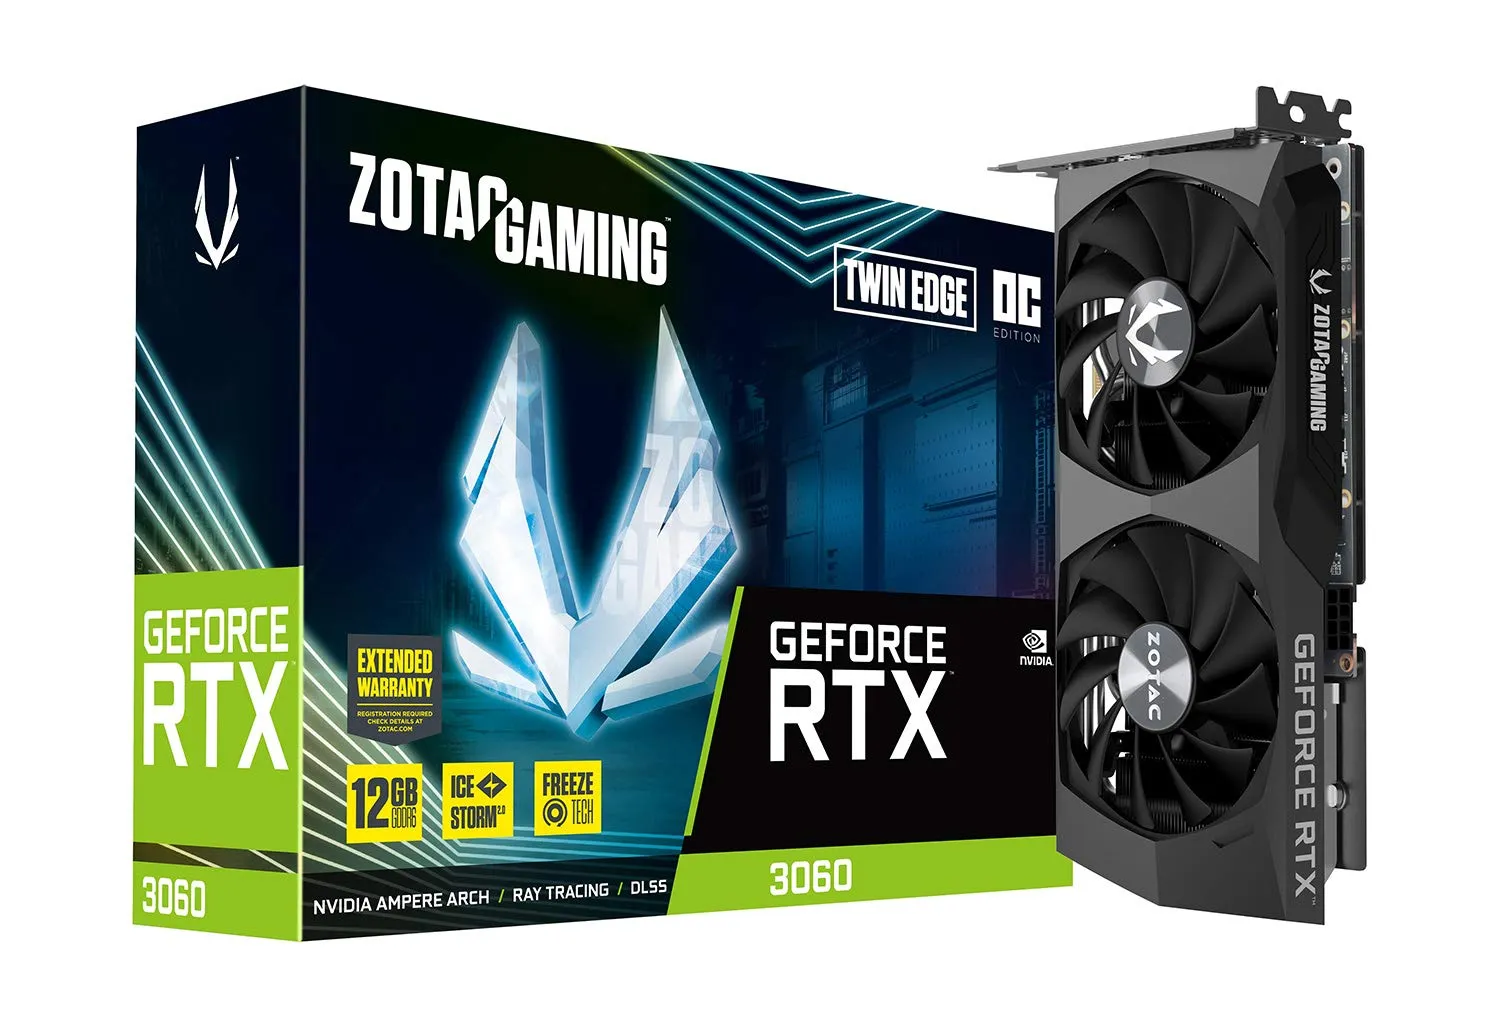 ZOTAC GeForce RTX 3060 Twin Edge Best Graphics Card for Gaming